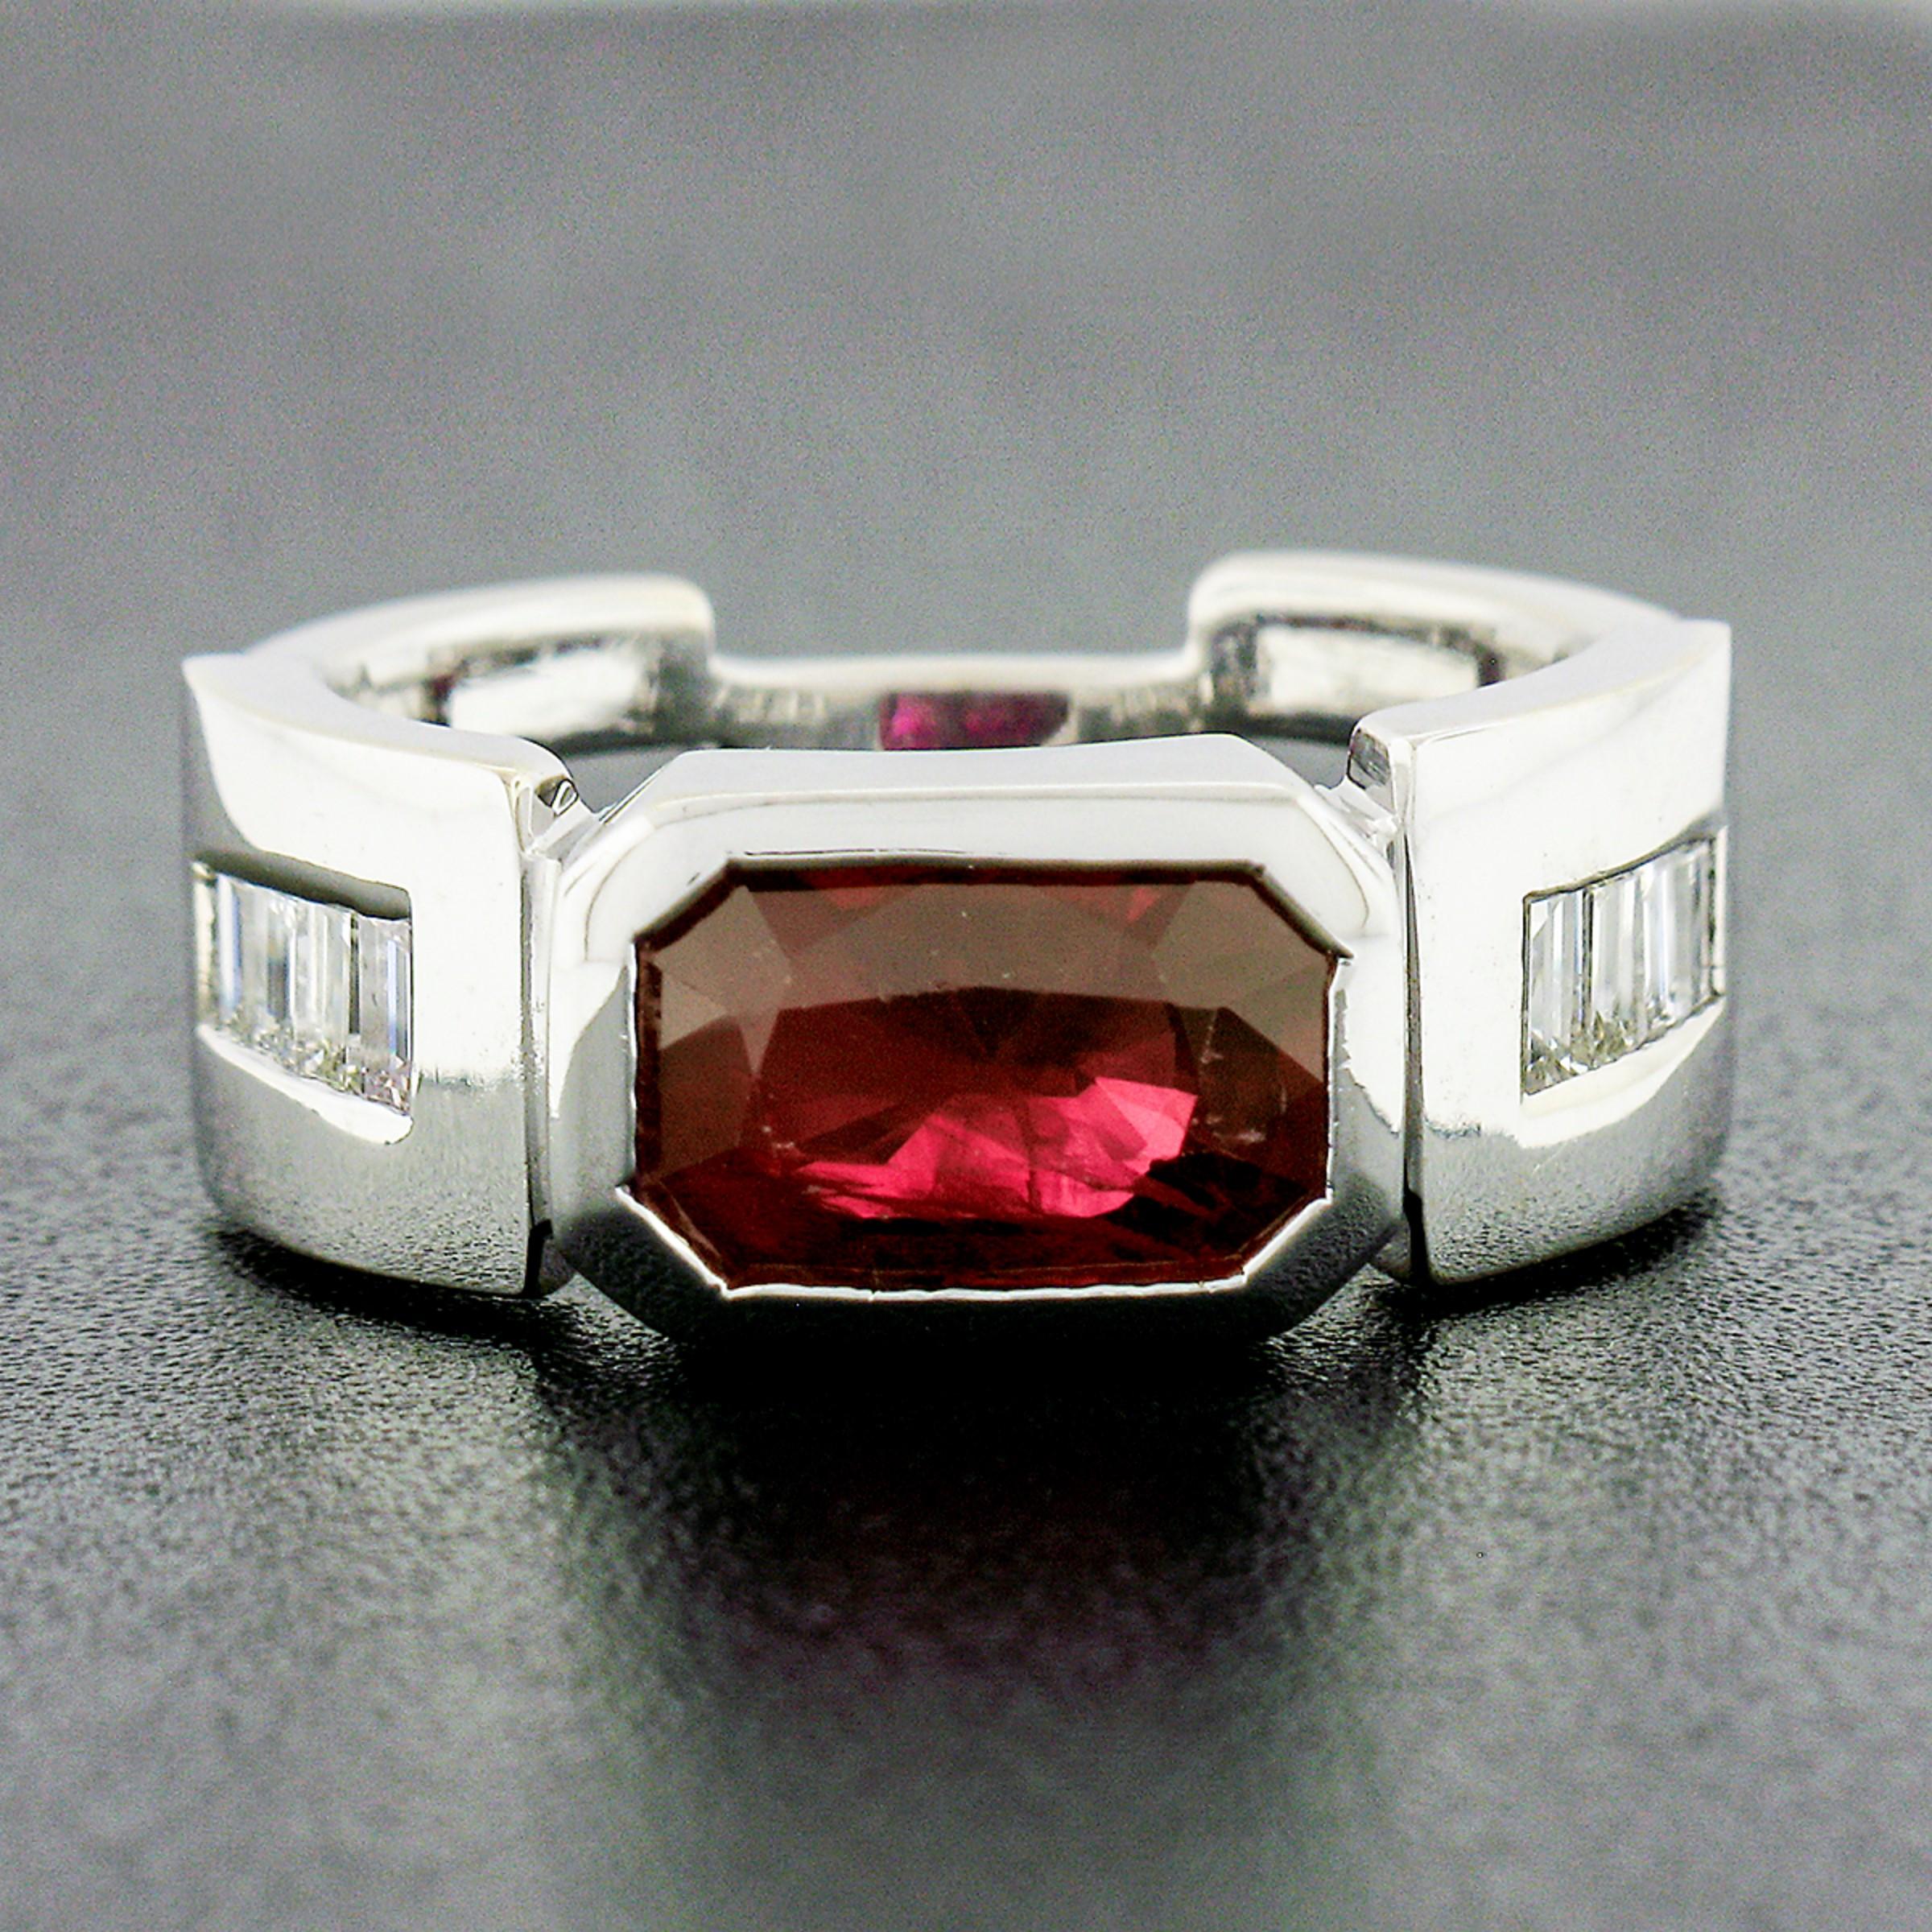 You're looking at an outstanding vintage ring that was crafted from solid 14k white gold. It features an elongated octagonal step cut, GIA certified, natural ruby neatly bezel set at the center. The ruby has a gorgeous deep red color that brings a